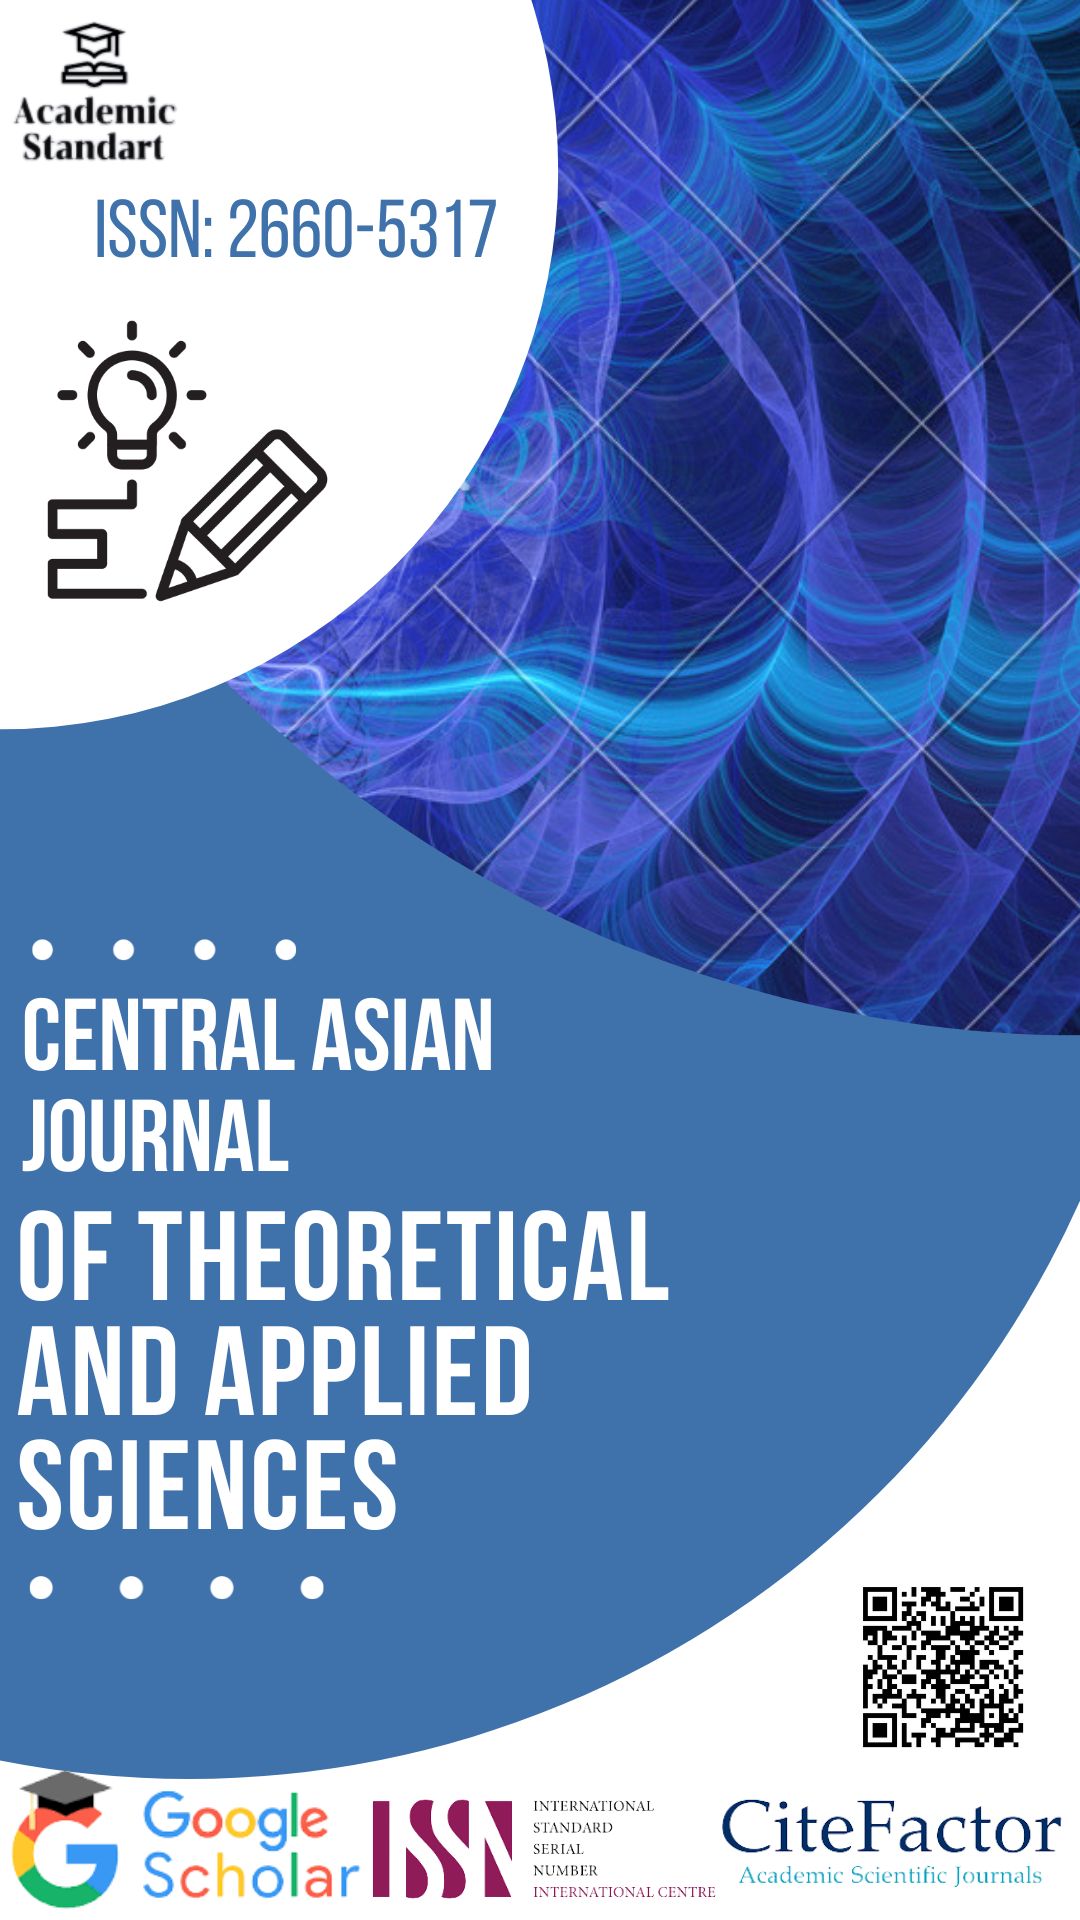 Central Asian Journal of Theoretical and Applied Sciences